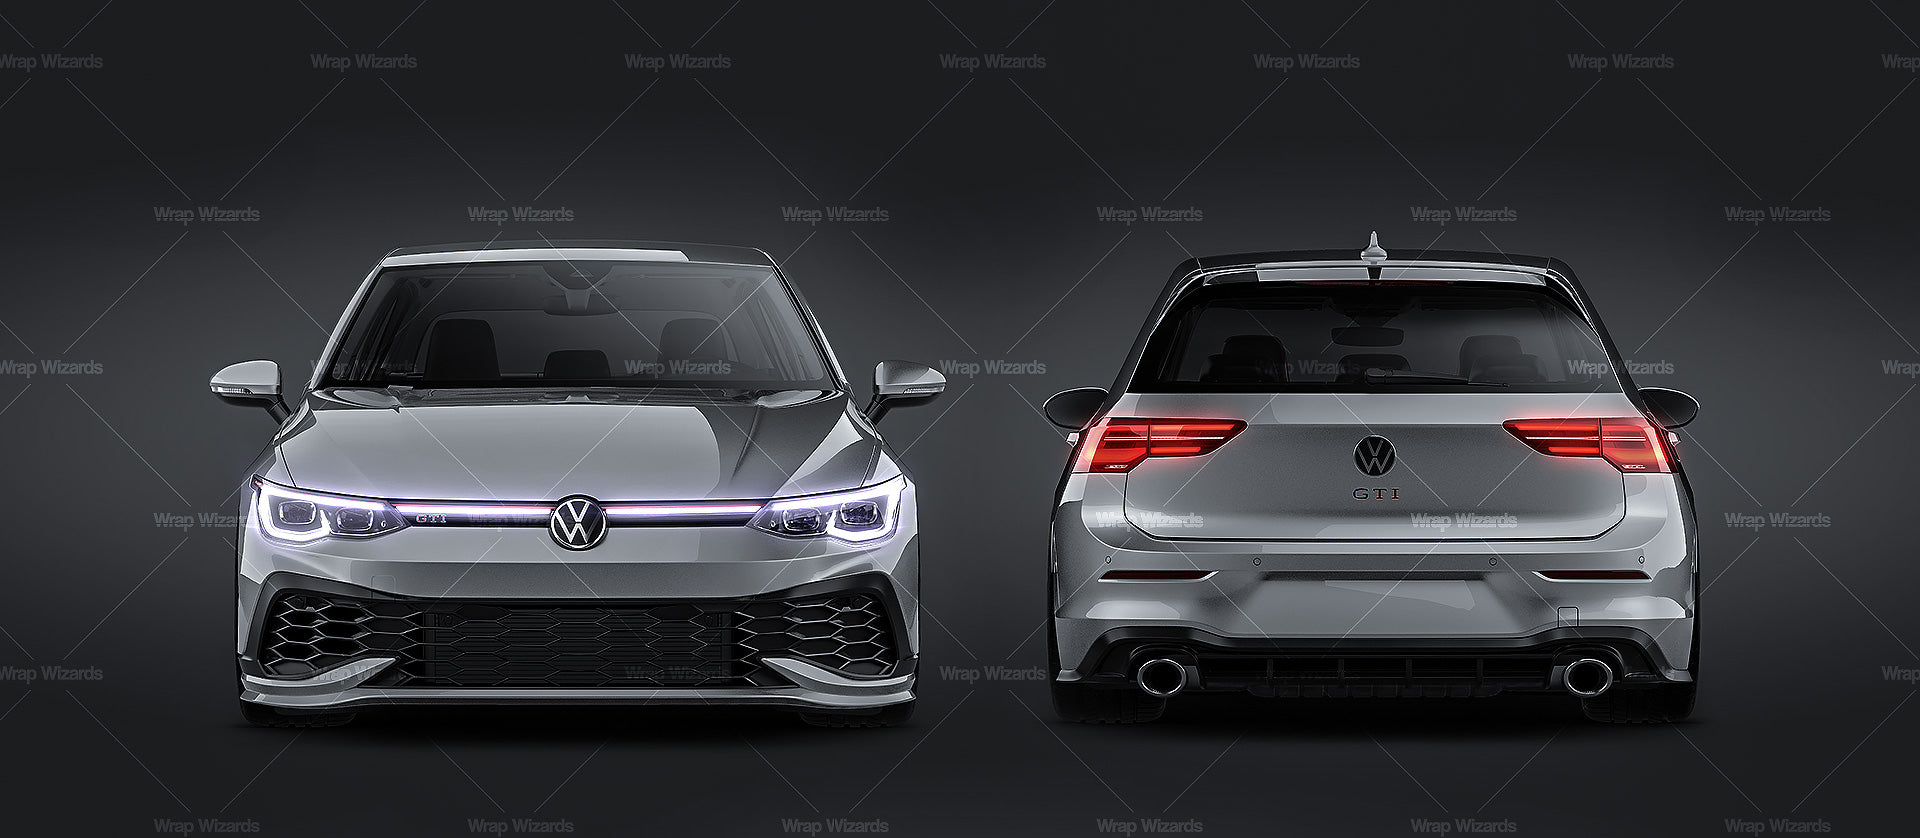 Volkswagen Golf MK8 GTI Clubsport 45 glossy finish - all sides Car Mockup Template.psd